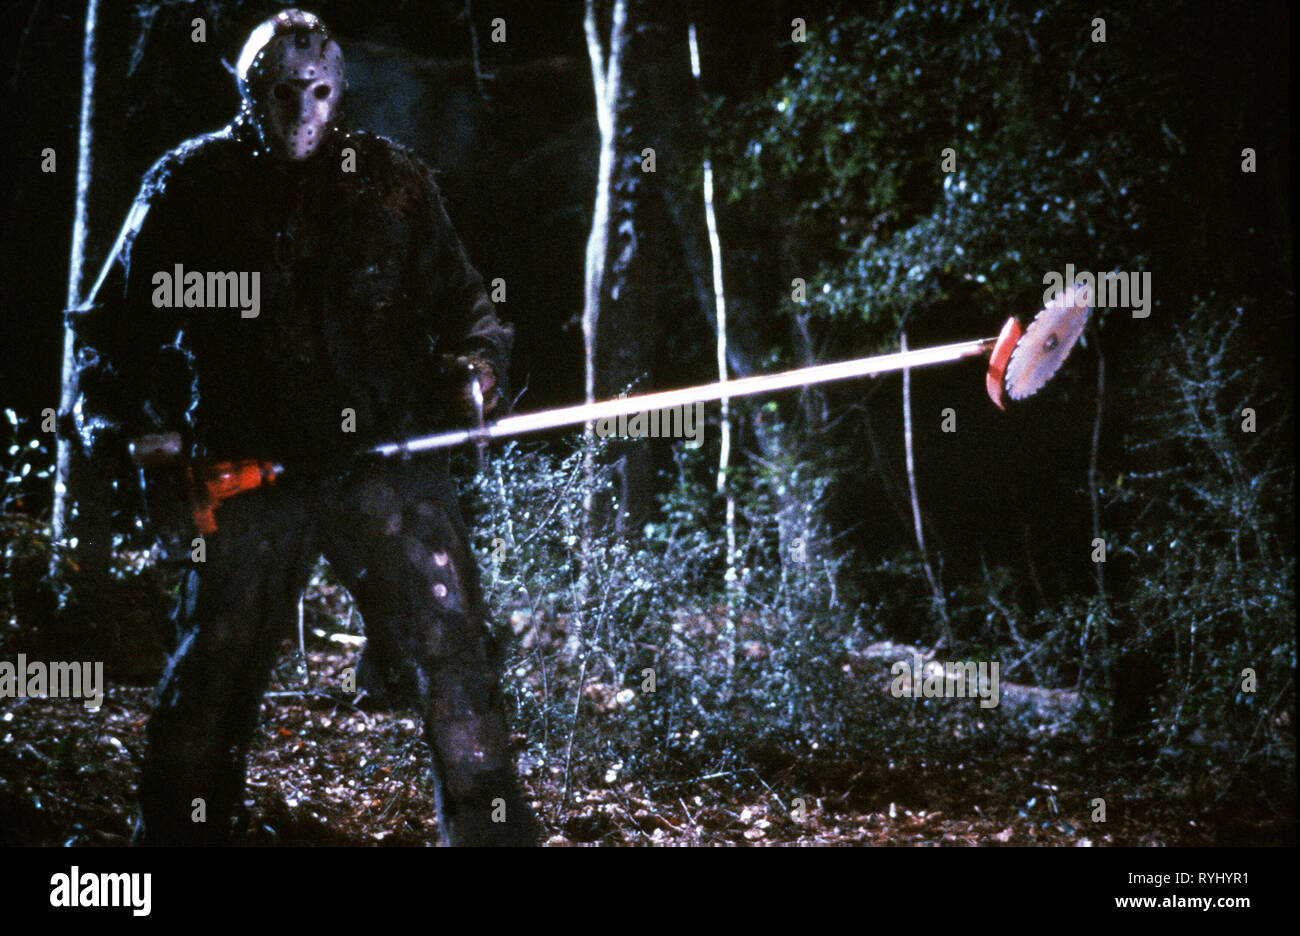 friday the 13th new blood full movie